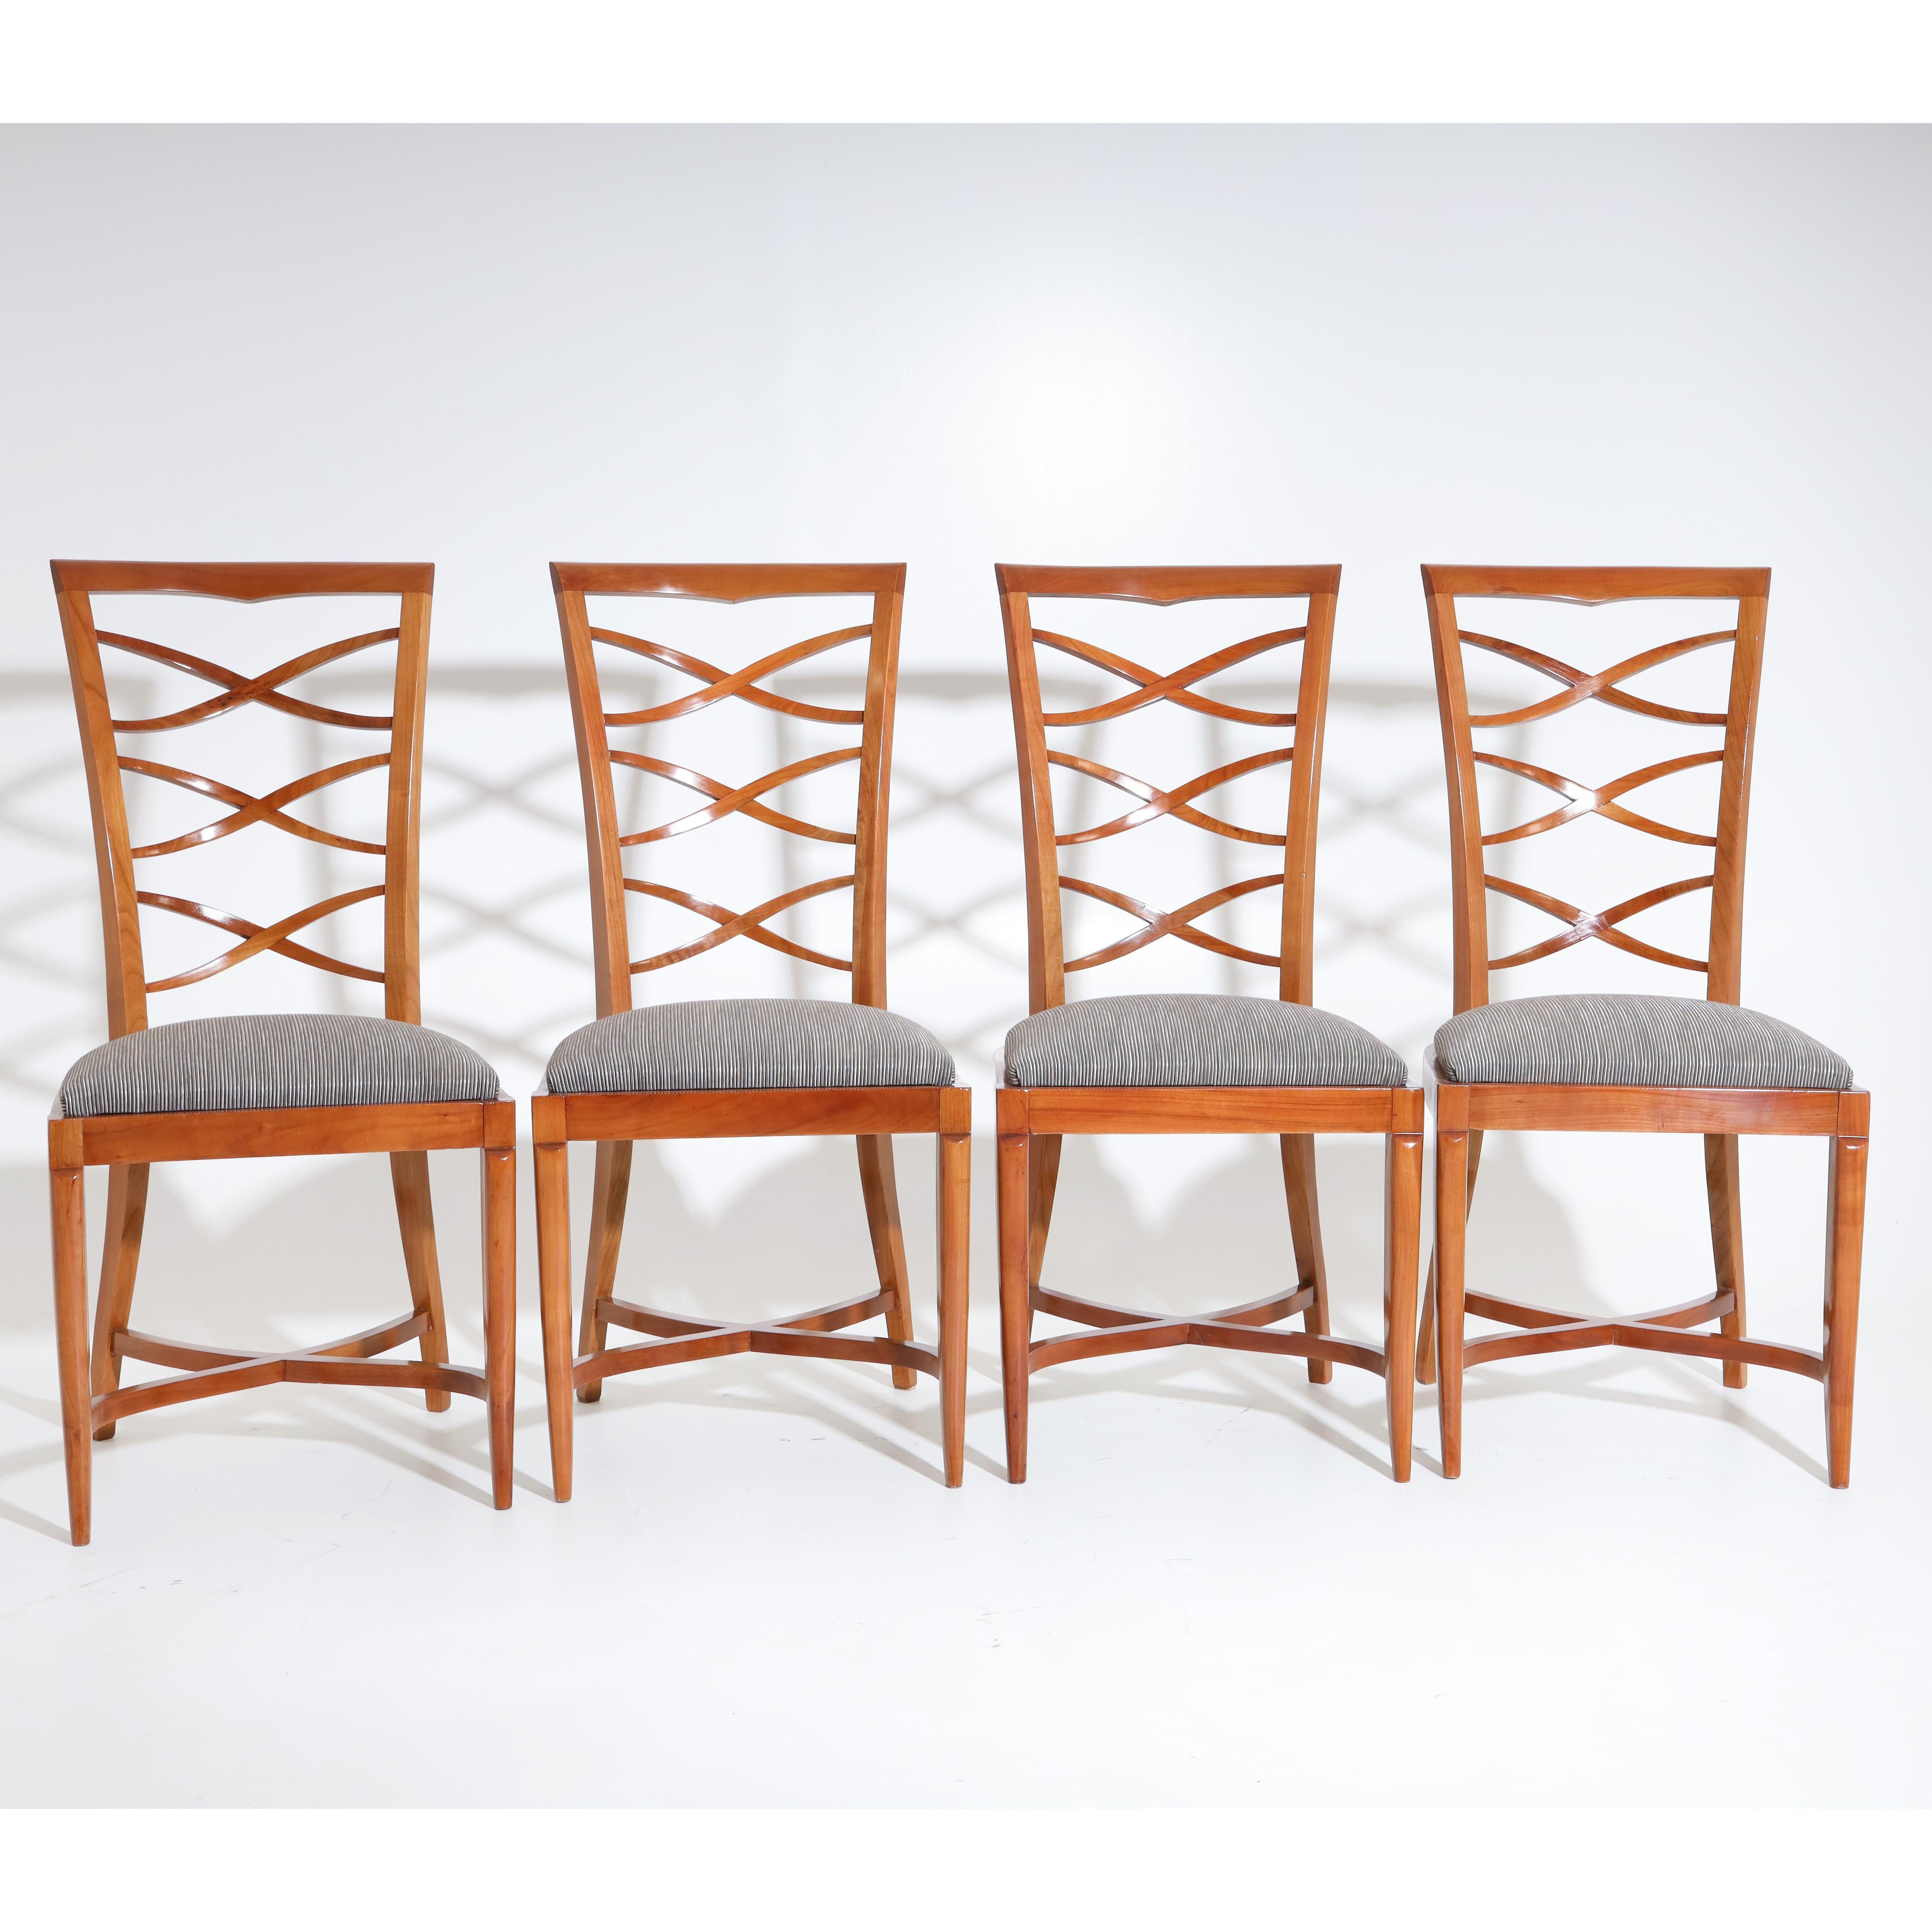 Set of four Art Deco chairs in cherry, with trapezoidal openwork backrests and upholstered seats. The chairs stand on elegantly curved legs with X-shaped bracing. The chairs are newly covered with a silver-grey striped fabric and hand polished.